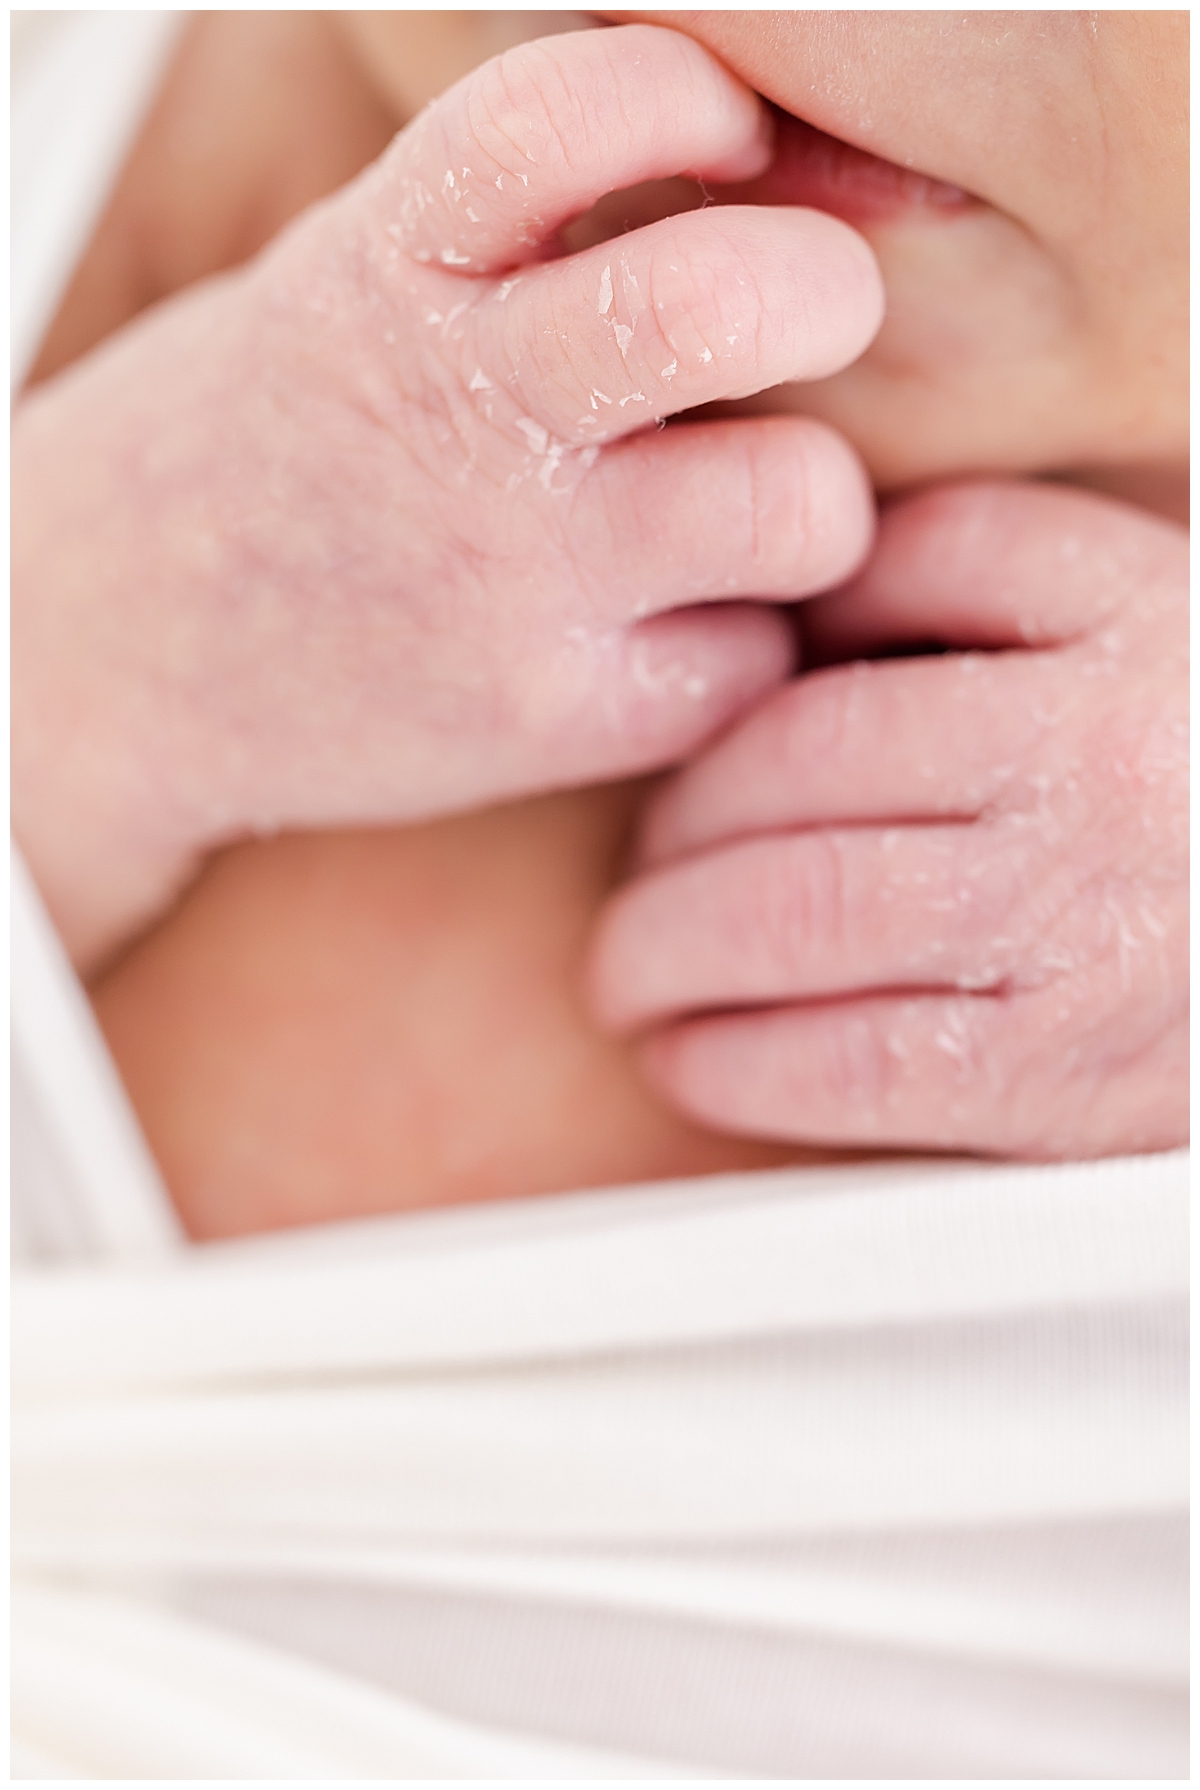 Newborn wrapped in white swaddle with close up of hand details